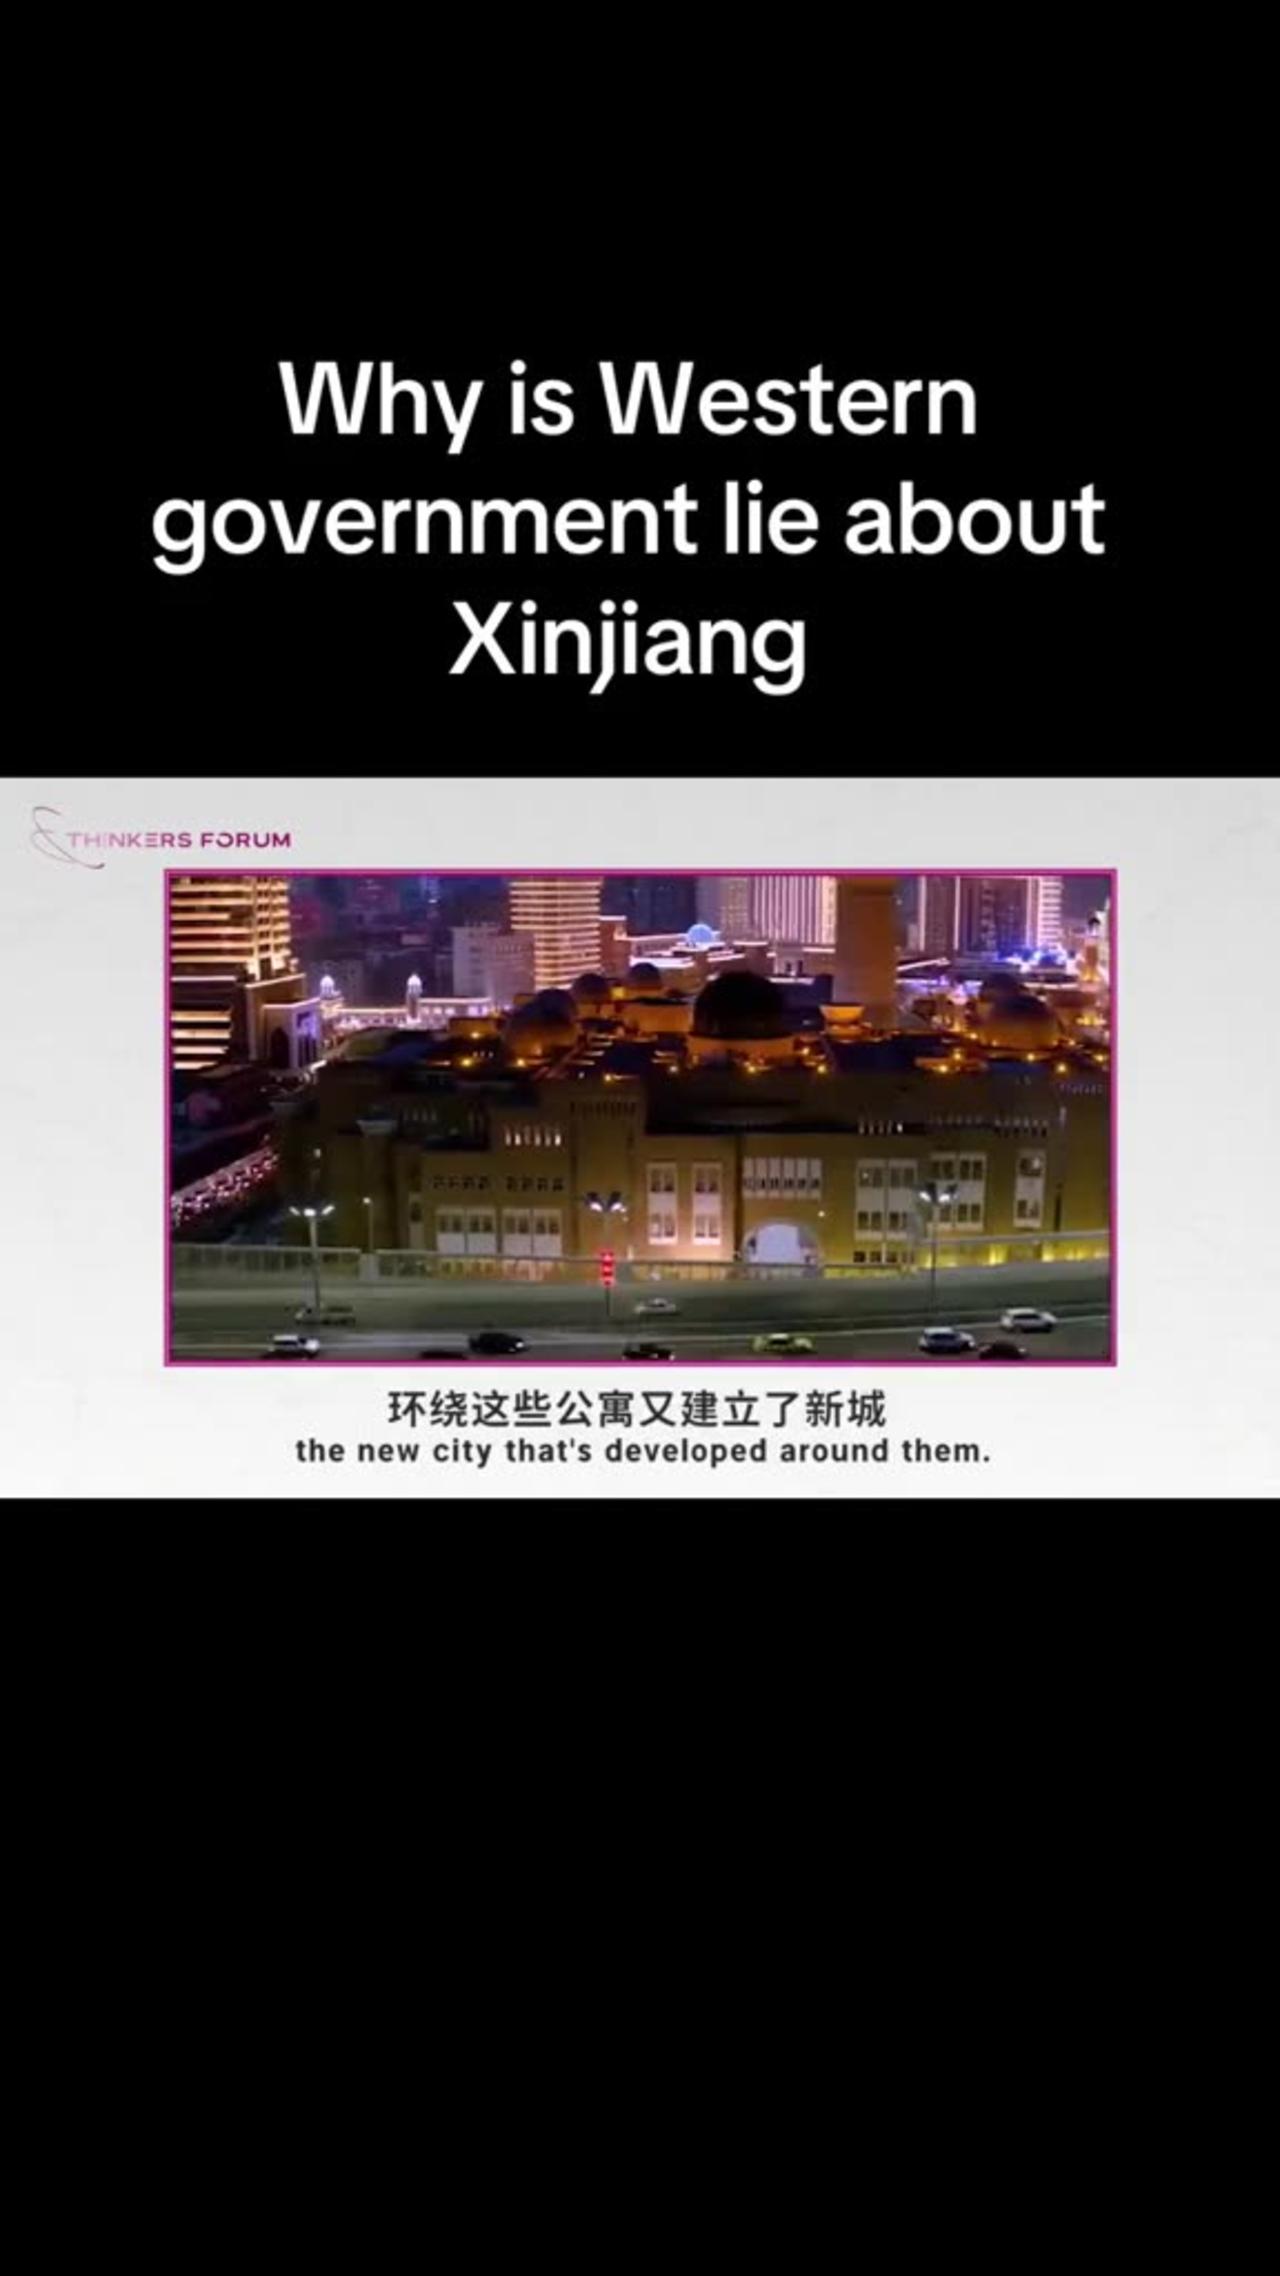 WHY DO WESTERN GOVERMENTS LIE ABOUT XINJIANG